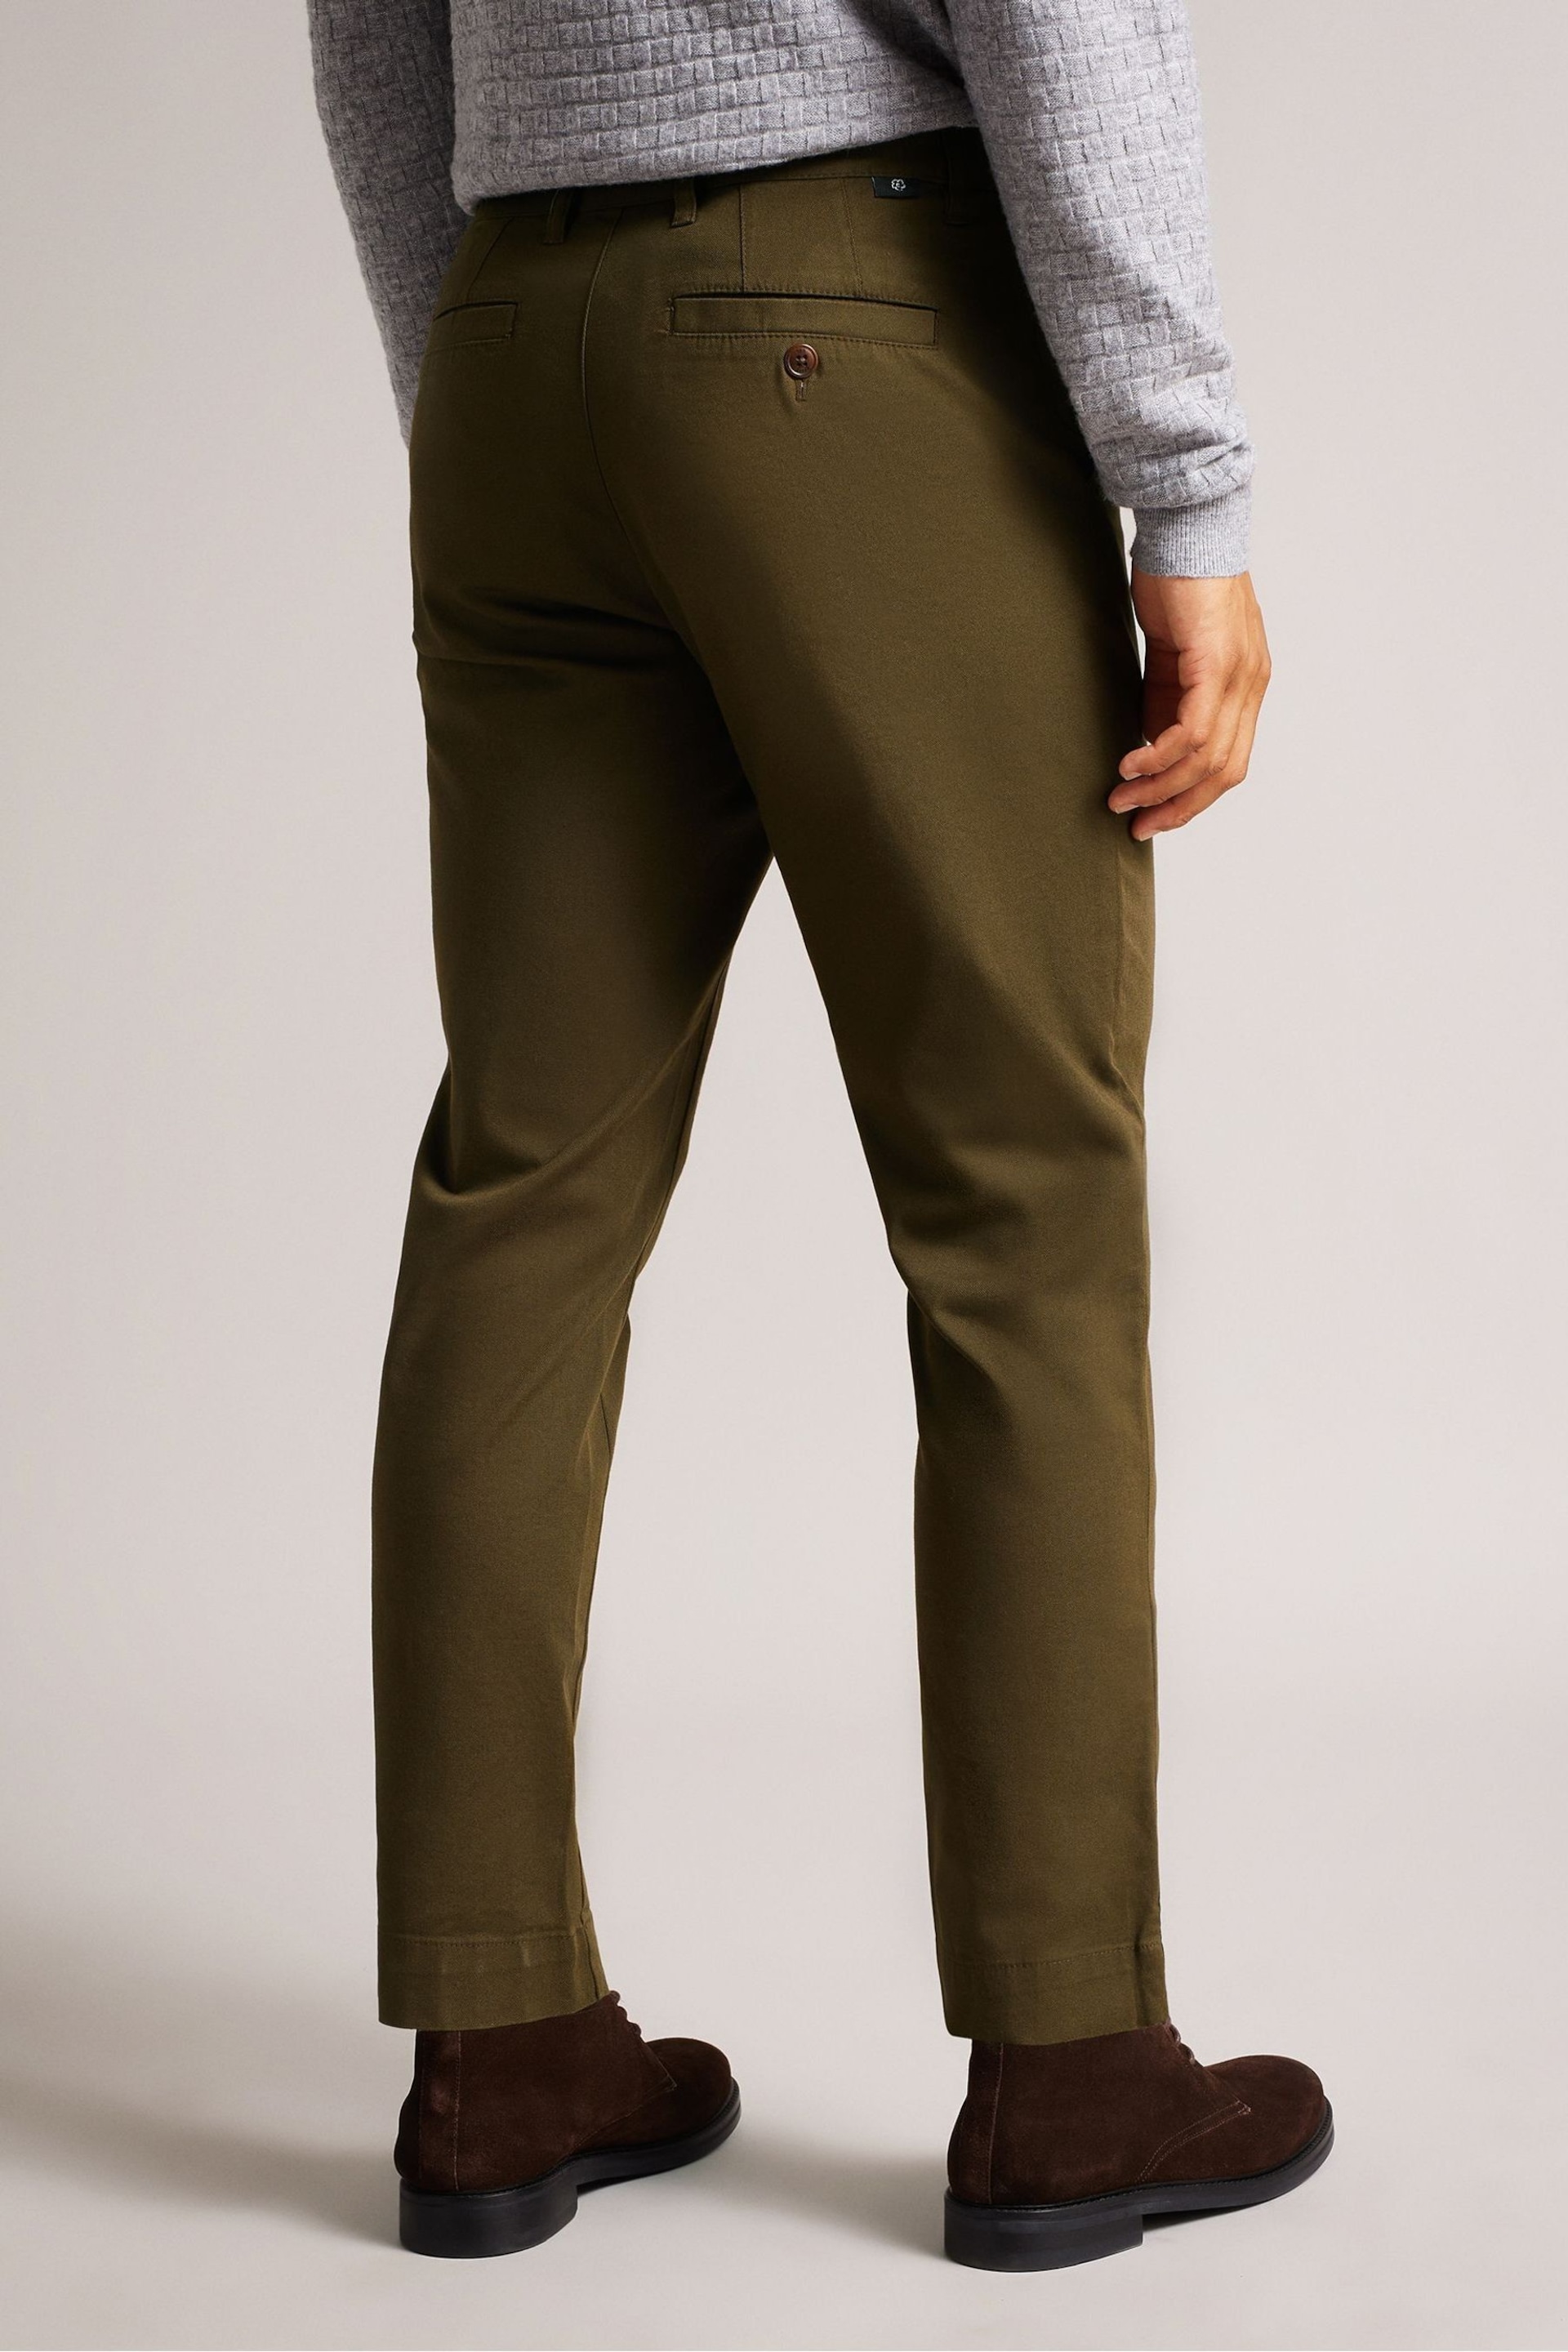 Ted Baker Green Genbee Casual Relaxed Chinos - Image 2 of 4